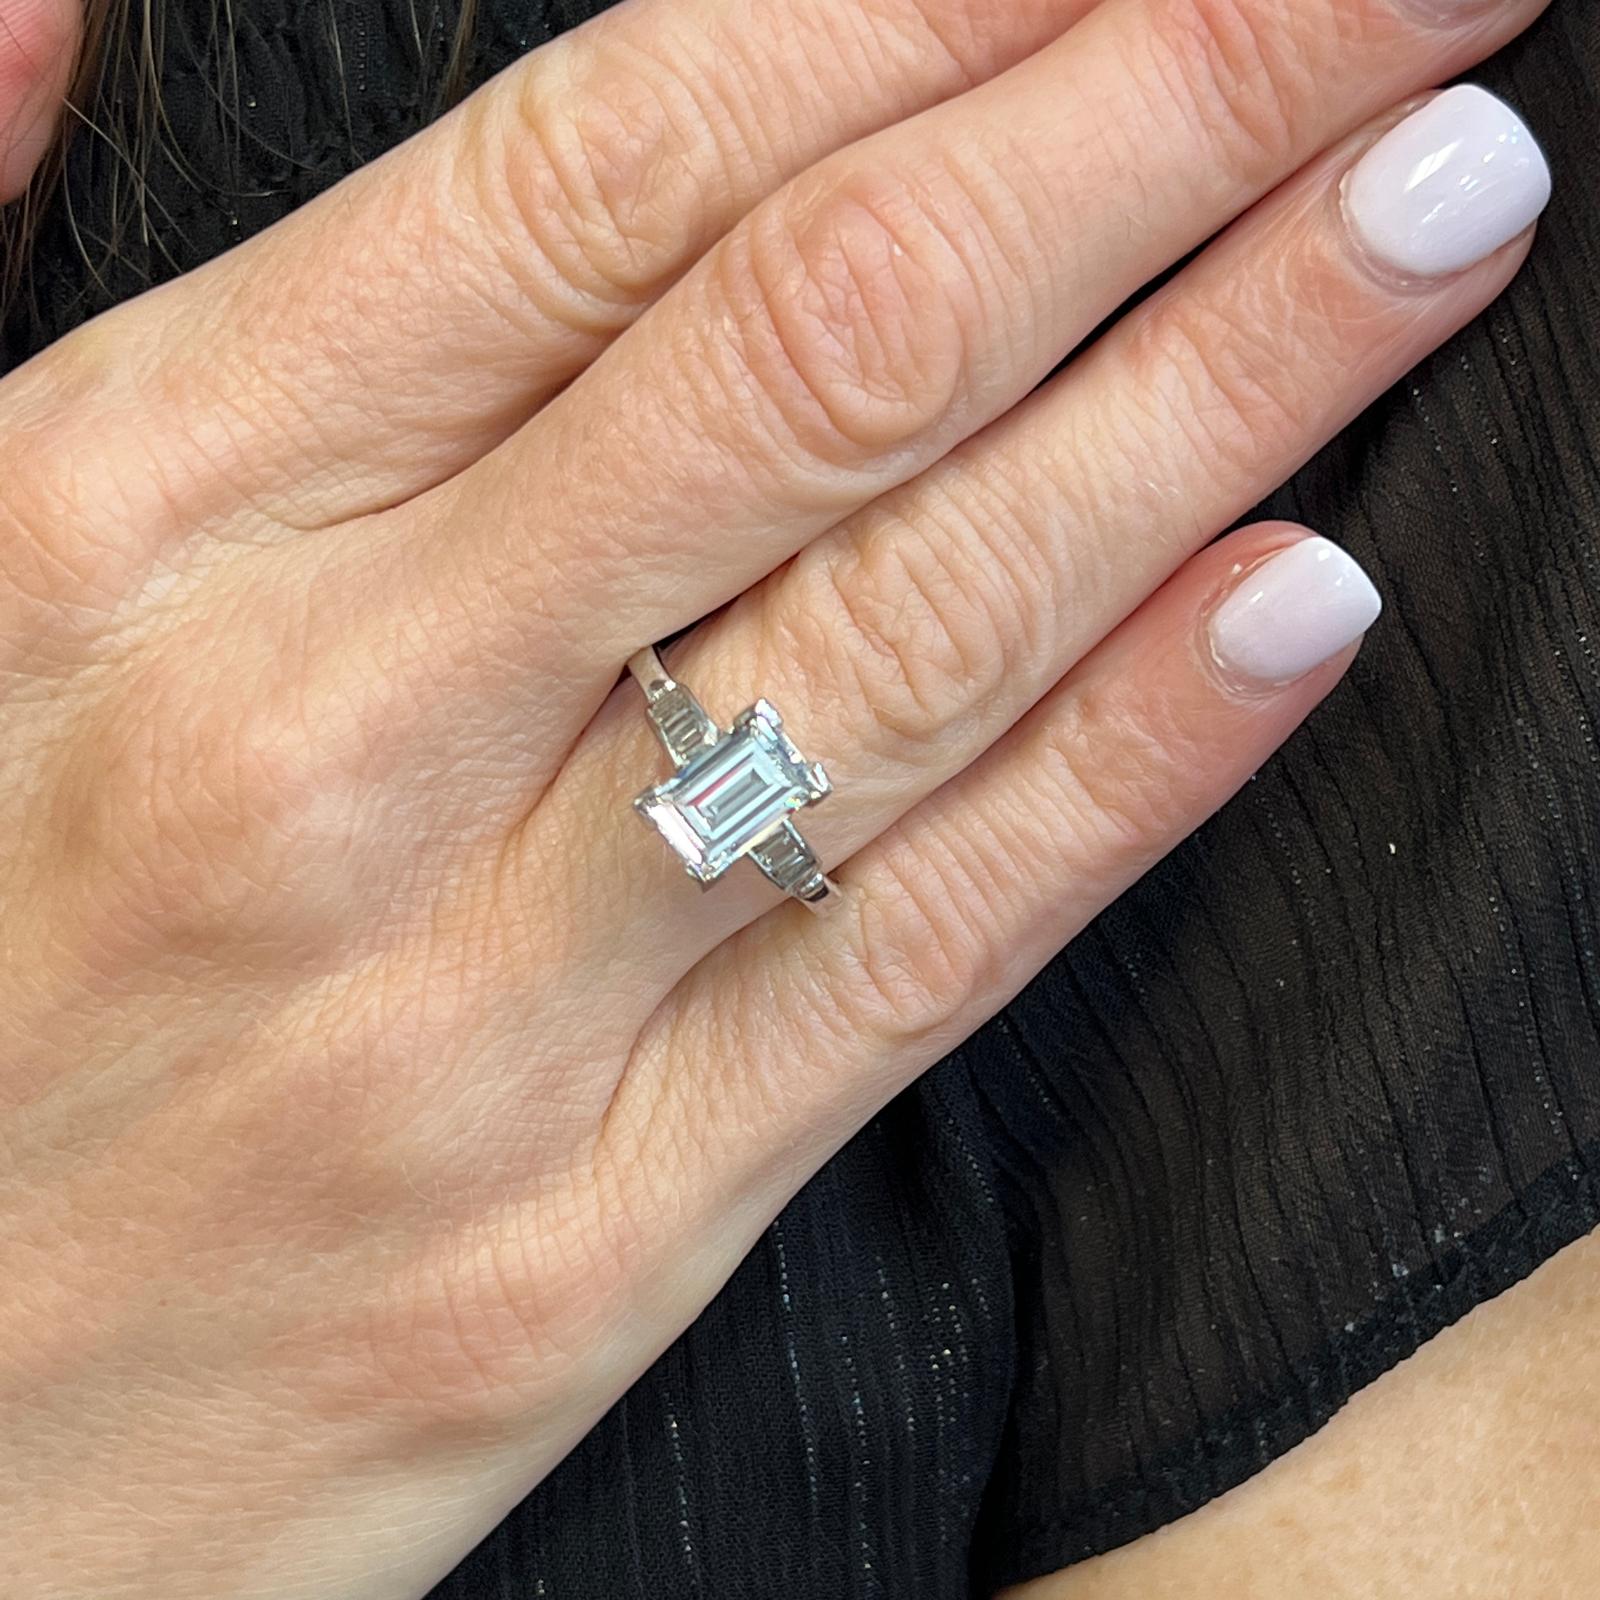 Elongated diamond vintage engagement ring handcrafted in platinum. The elongated rectangular step cut diamond is circa 1940's, and is diamond is graded F color and SI1 clarity by the GIA (see the report in photos). The mounting features 6 straight